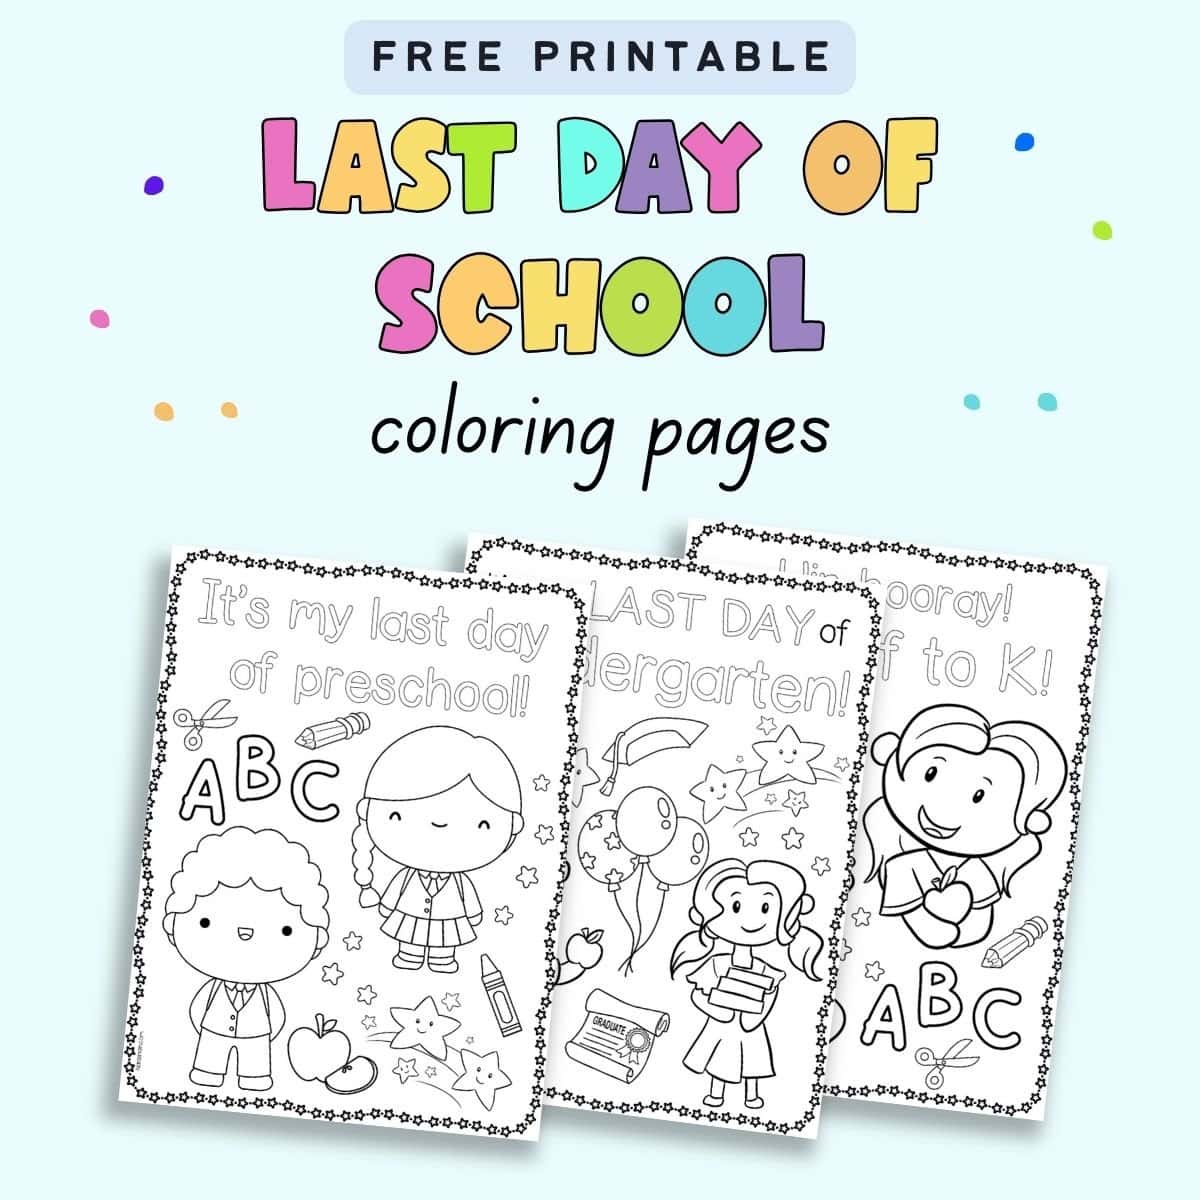 text "free printable last day of school coloring pages" with a preview of last day of school coloring pages for preschool, pre-k, and kindergarten 